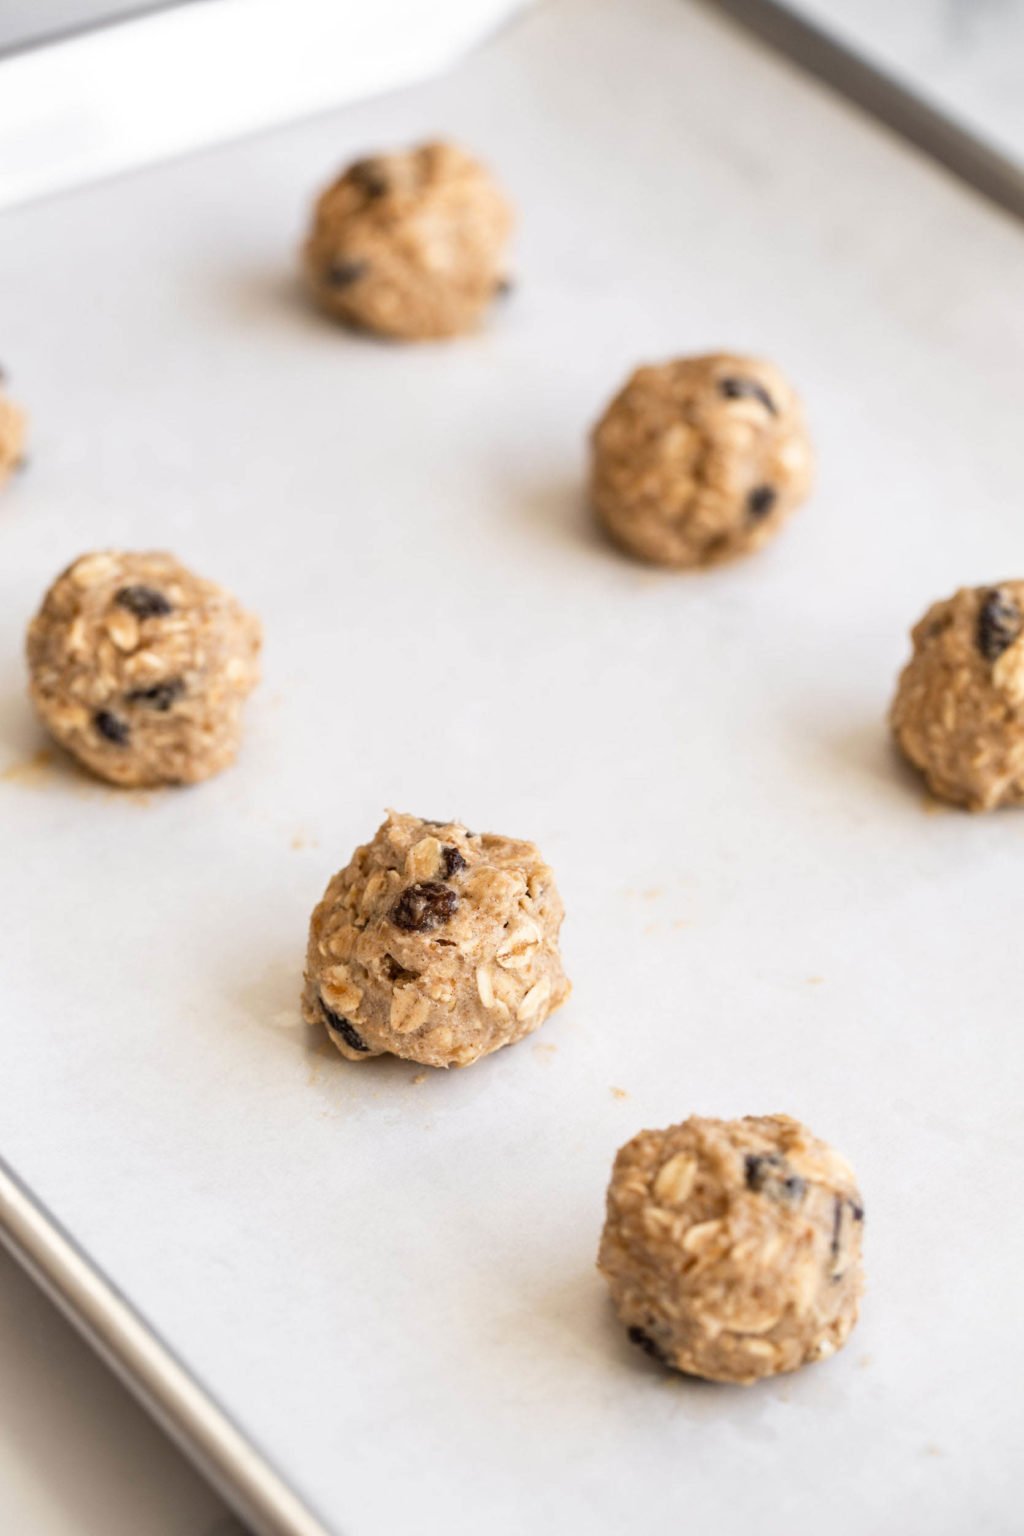 Cookie dough is resting in round balls on a lined baking sheet.